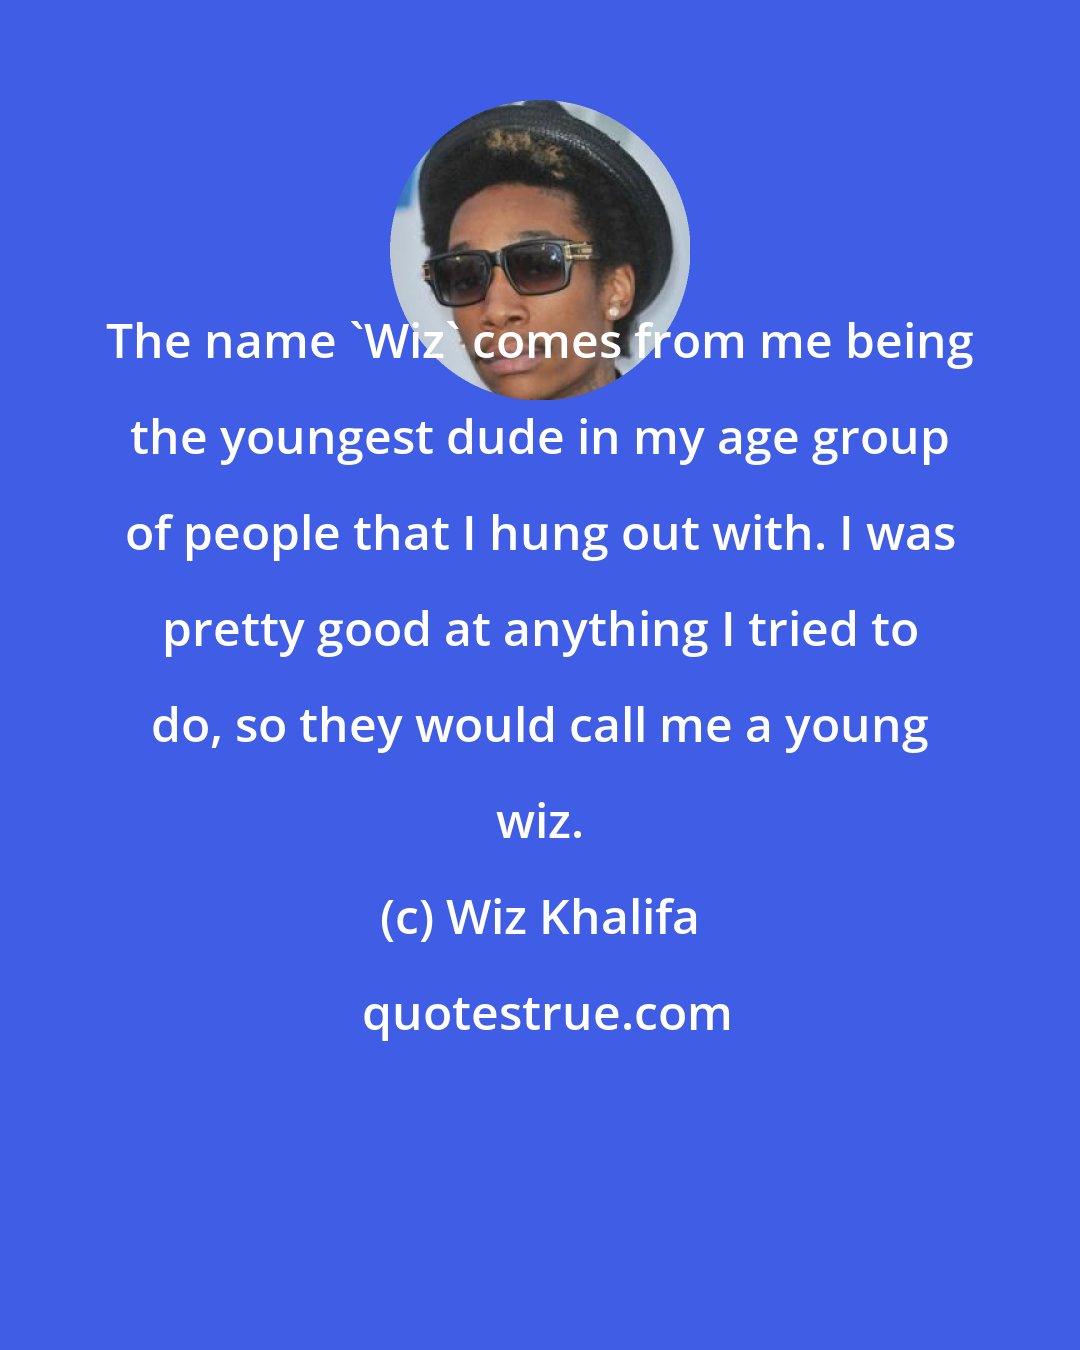 Wiz Khalifa: The name 'Wiz' comes from me being the youngest dude in my age group of people that I hung out with. I was pretty good at anything I tried to do, so they would call me a young wiz.